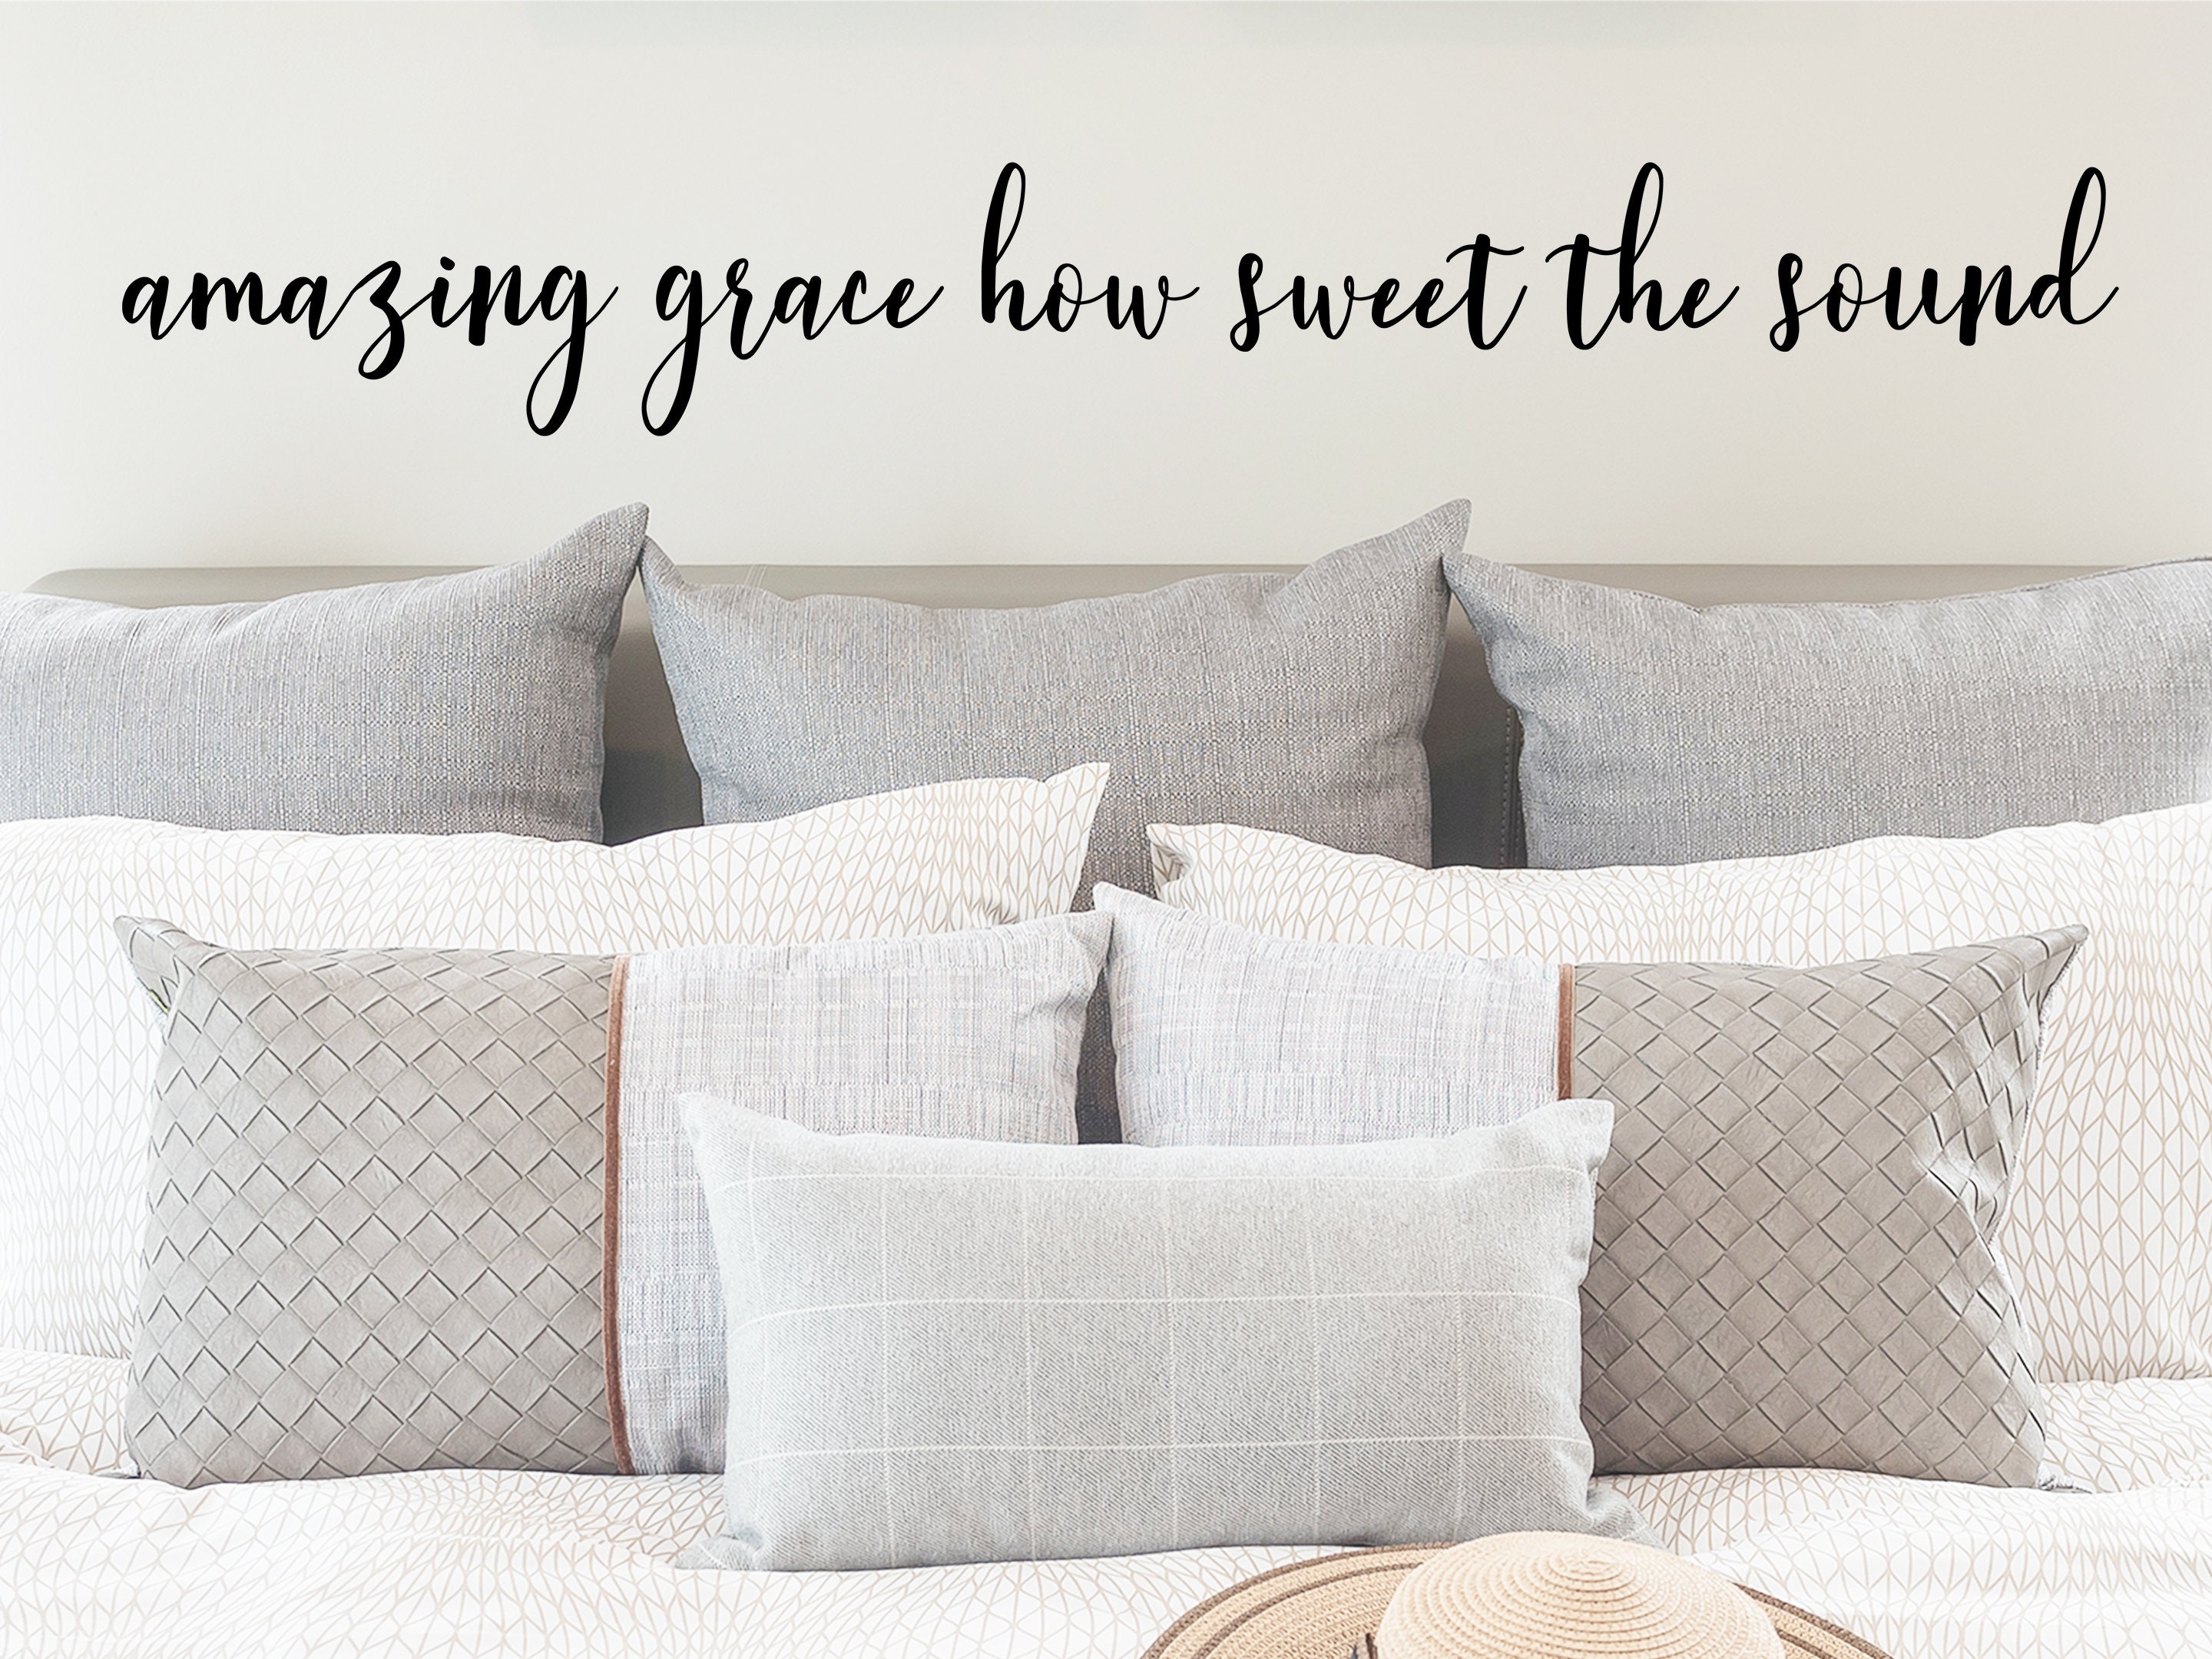 AMAZING GRACE HOW SWEET THE SOUND VINYL WALL WINDOW DECAL STICKER HOME DECOR